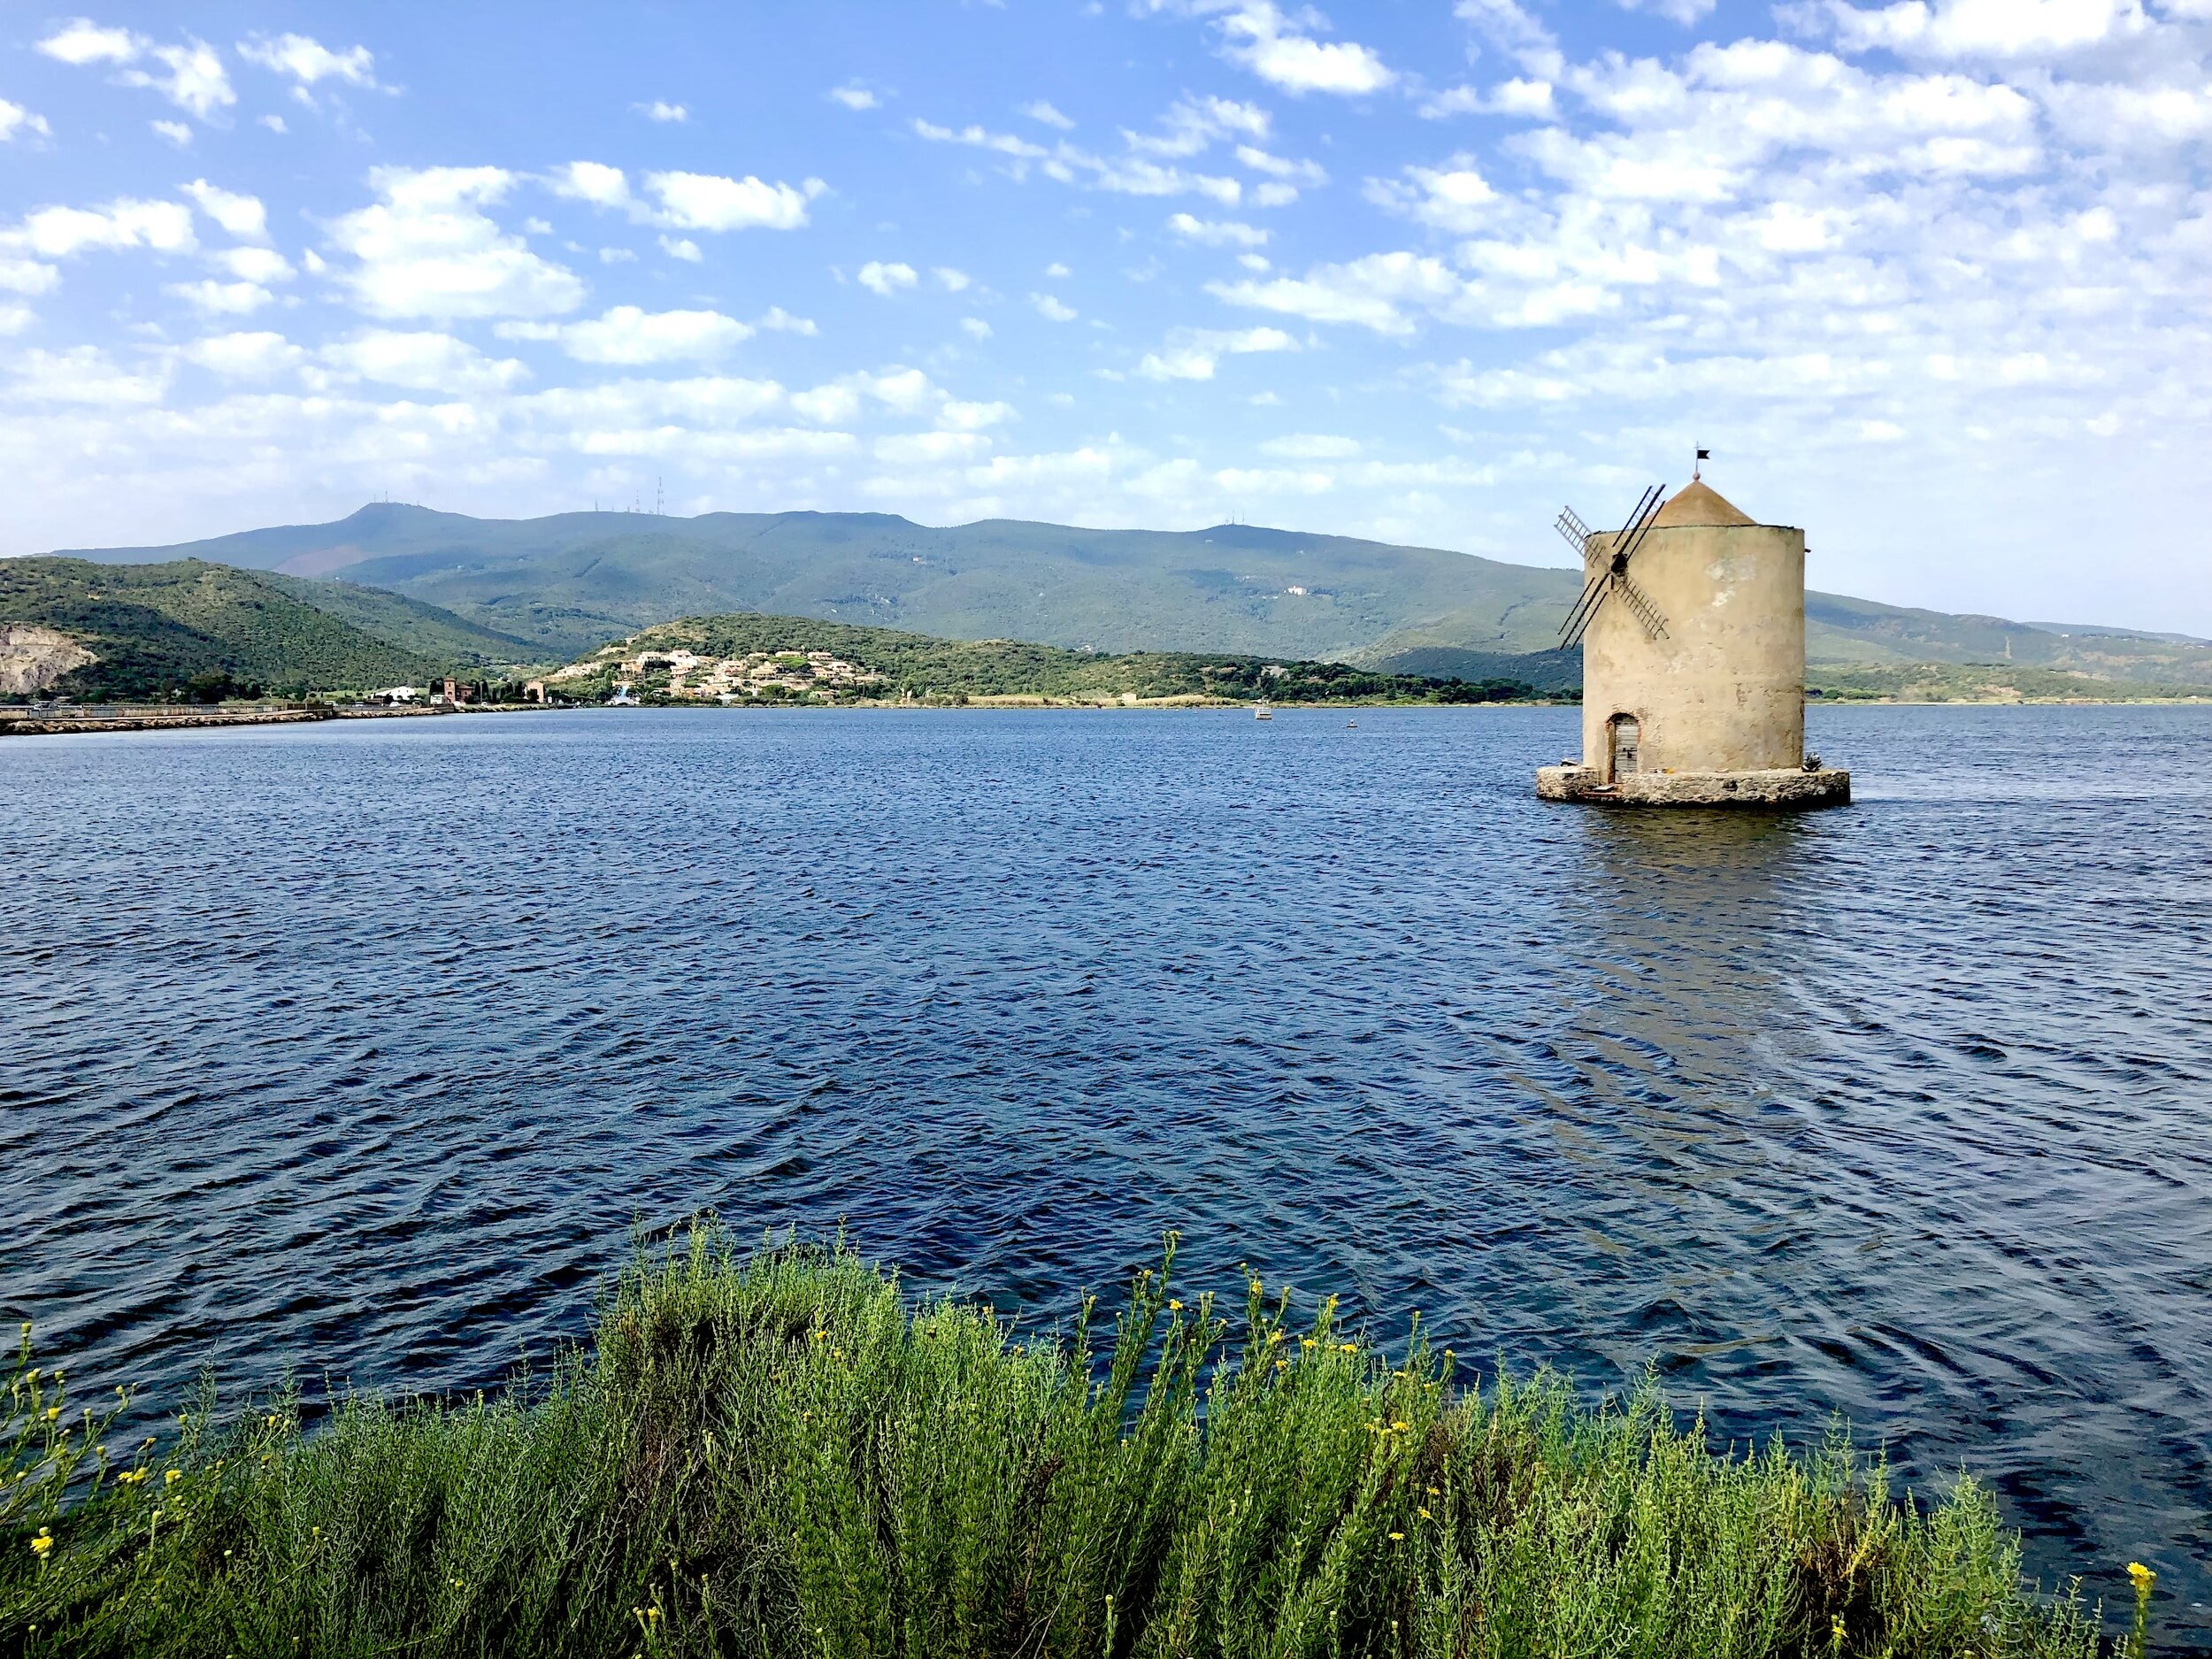 A stone windmill sitting in the middle of the Laguna di Orbetello in the town of Orbetello